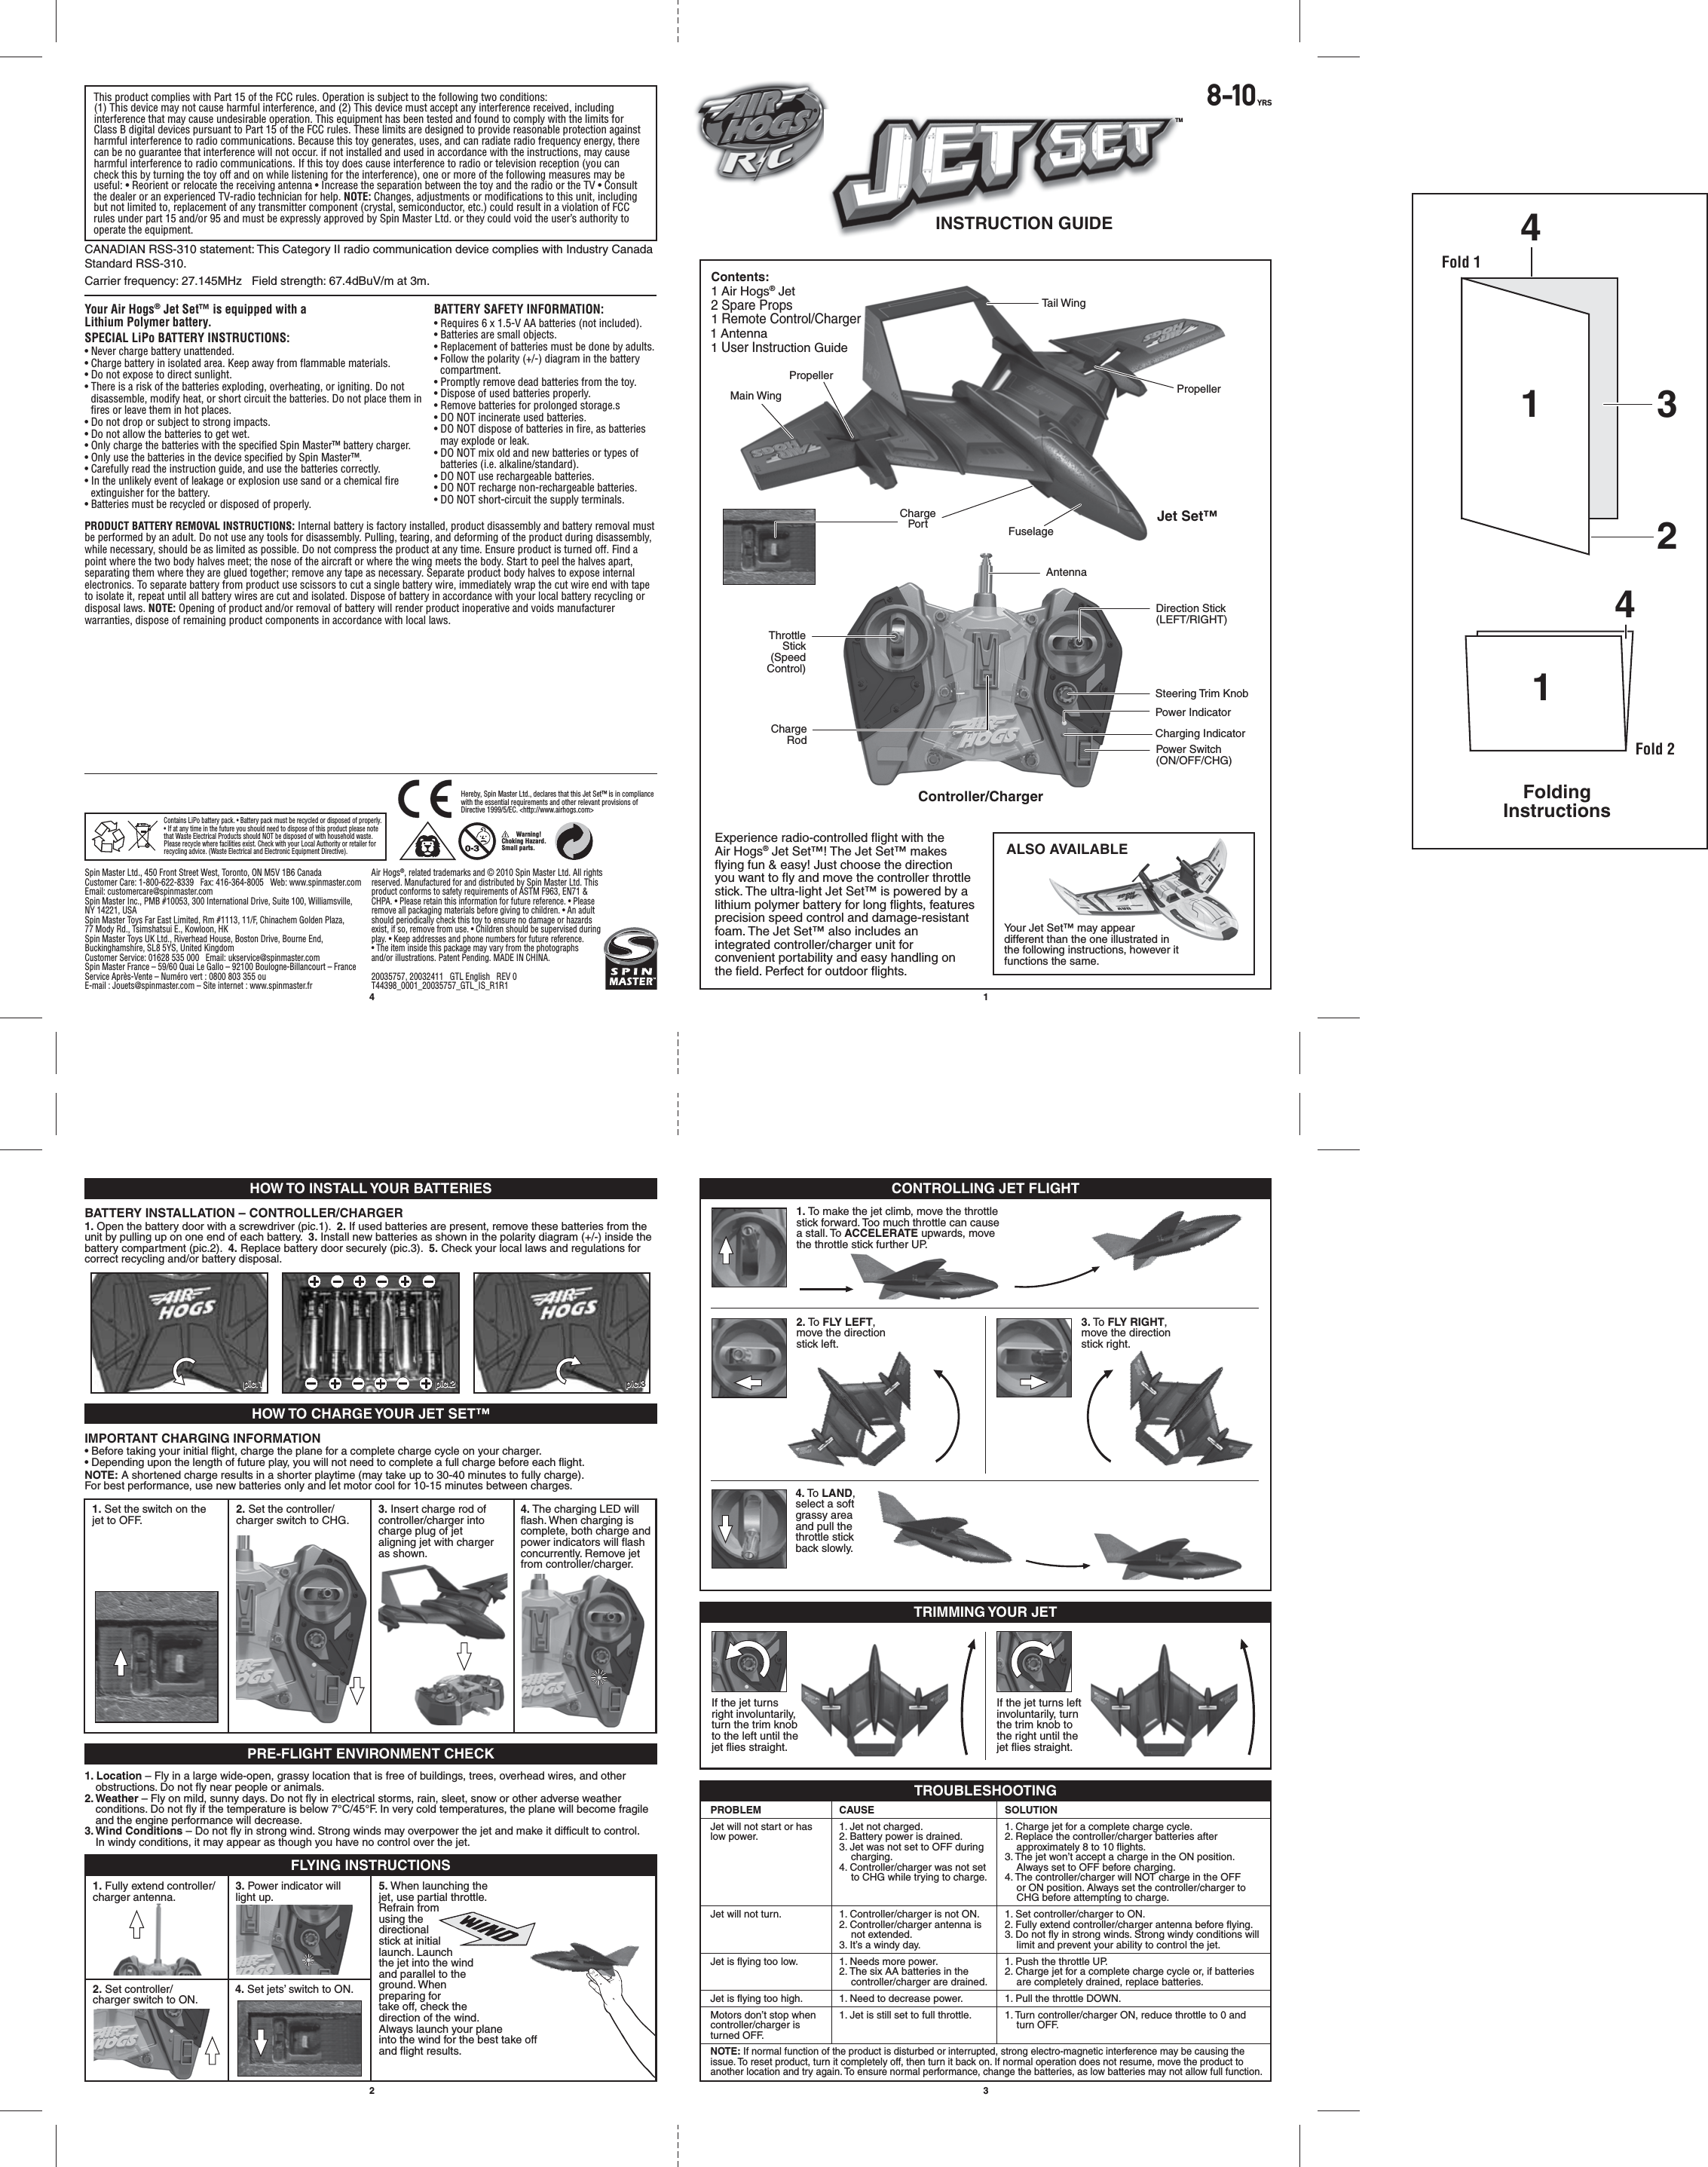 ®TM8-10YRSINSTRUCTION GUIDEContents: 1 Air Hogs® Jet                        2 Spare Props                                            1 Remote Control/Charger                 1 Antenna 1 User Instruction Guide Air Hogs®, related trademarks and © 2010 Spin Master Ltd. All rights reserved. Manufactured for and distributed by Spin Master Ltd. This product conforms to safety requirements of ASTM F963, EN71 &amp; CHPA. • Please retain this information for future reference. • Please remove all packaging materials before giving to children. • An adult should periodically check this toy to ensure no damage or hazards exist, if so, remove from use. • Children should be supervised during play. • Keep addresses and phone numbers for future reference. • The item inside this package may vary from the photographs and/or illustrations. Patent Pending. MADE IN CHINA.20035757, 20032411   GTL English   REV 0T44398_0001_20035757_GTL_IS_R1R1Spin Master Ltd., 450 Front Street West, Toronto, ON M5V 1B6 CanadaCustomer Care: 1-800-622-8339   Fax: 416-364-8005   Web: www.spinmaster.com   Email: customercare@spinmaster.comSpin Master Inc., PMB #10053, 300 International Drive, Suite 100, Williamsville, NY 14221, USASpin Master Toys Far East Limited, Rm #1113, 11/F, Chinachem Golden Plaza, 77 Mody Rd., Tsimshatsui E., Kowloon, HKSpin Master Toys UK Ltd., Riverhead House, Boston Drive, Bourne End, Buckinghamshire, SL8 5YS, United KingdomCustomer Service: 01628 535 000   Email: ukservice@spinmaster.com Spin Master France – 59/60 Quai Le Gallo – 92100 Boulogne-Billancourt – France Service Après-Vente – Numéro vert : 0800 803 355 ou E-mail : Jouets@spinmaster.com – Site internet : www.spinmaster.frBATTERY SAFETY INFORMATION:• Requires 6 x 1.5-V AA batteries (not included).• Batteries are small objects. • Replacement of batteries must be done by adults.• Follow the polarity (+/-) diagram in the battery compartment.• Promptly remove dead batteries from the toy.• Dispose of used batteries properly.• Remove batteries for prolonged storage.s• DO NOT incinerate used batteries.• DO NOT dispose of batteries in fire, as batteries may explode or leak.• DO NOT mix old and new batteries or types of batteries (i.e. alkaline/standard).• DO NOT use rechargeable batteries.• DO NOT recharge non-rechargeable batteries.• DO NOT short-circuit the supply terminals.Your Air Hogs® Jet Set™ is equipped with a Lithium Polymer battery.SPECIAL LiPo BATTERY INSTRUCTIONS:• Never charge battery unattended. • Charge battery in isolated area. Keep away from flammable materials. • Do not expose to direct sunlight. • There is a risk of the batteries exploding, overheating, or igniting. Do not disassemble, modify heat, or short circuit the batteries. Do not place them in fires or leave them in hot places. • Do not drop or subject to strong impacts. • Do not allow the batteries to get wet. • Only charge the batteries with the specified Spin Master™ battery charger. • Only use the batteries in the device specified by Spin Master™. • Carefully read the instruction guide, and use the batteries correctly. • In the unlikely event of leakage or explosion use sand or a chemical fire extinguisher for the battery.• Batteries must be recycled or disposed of properly.PRODUCT BATTERY REMOVAL INSTRUCTIONS: Internal battery is factory installed, product disassembly and battery removal must be performed by an adult. Do not use any tools for disassembly. Pulling, tearing, and deforming of the product during disassembly, while necessary, should be as limited as possible. Do not compress the product at any time. Ensure product is turned off. Find a point where the two body halves meet; the nose of the aircraft or where the wing meets the body. Start to peel the halves apart, separating them where they are glued together; remove any tape as necessary. Separate product body halves to expose internal electronics. To separate battery from product use scissors to cut a single battery wire, immediately wrap the cut wire end with tape to isolate it, repeat until all battery wires are cut and isolated. Dispose of battery in accordance with your local battery recycling or disposal laws. NOTE: Opening of product and/or removal of battery will render product inoperative and voids manufacturer warranties, dispose of remaining product components in accordance with local laws.4 12 3This product complies with Part 15 of the FCC rules. Operation is subject to the following two conditions: (1) This device may not cause harmful interference, and (2) This device must accept any interference received, including interference that may cause undesirable operation. This equipment has been tested and found to comply with the limits for Class B digital devices pursuant to Part 15 of the FCC rules. These limits are designed to provide reasonable protection against harmful interference to radio communications. Because this toy generates, uses, and can radiate radio frequency energy, there can be no guarantee that interference will not occur. if not installed and used in accordance with the instructions, may cause harmful interference to radio communications. If this toy does cause interference to radio or television reception (you can check this by turning the toy off and on while listening for the interference), one or more of the following measures may be useful: • Reorient or relocate the receiving antenna • Increase the separation between the toy and the radio or the TV • Consult the dealer or an experienced TV-radio technician for help. NOTE: Changes, adjustments or modifications to this unit, including but not limited to, replacement of any transmitter component (crystal, semiconductor, etc.) could result in a violation of FCC rules under part 15 and/or 95 and must be expressly approved by Spin Master Ltd. or they could void the user’s authority to operate the equipment.ALSO AVAILABLEYour Jet Set™ may appear different than the one illustrated in the following instructions, however it functions the same.Experience radio-controlled flight with the Air Hogs® Jet Set™! The Jet Set™ makes flying fun &amp; easy! Just choose the direction you want to fly and move the controller throttle stick. The ultra-light Jet Set™ is powered by a lithium polymer battery for long flights, features precision speed control and damage-resistant foam. The Jet Set™ also includes an integrated controller/charger unit for convenient portability and easy handling on the field. Perfect for outdoor flights.FuselageJet Set™Controller/ChargerMain Wing PropellerPropellerTail WingAntennaThrottleStick(SpeedControl)Power IndicatorDirection Stick(LEFT/RIGHT)Charging IndicatorSteering Trim KnobPower Switch(ON/OFF/CHG)ChargeRodChargePortHOW TO INSTALL YOUR BATTERIES CONTROLLING JET FLIGHTTRIMMING YOUR JETHOW TO CHARGE YOUR JET SET™PRE-FLIGHT ENVIRONMENT CHECKTROUBLESHOOTINGBATTERY INSTALLATION – CONTROLLER/CHARGER1. Open the battery door with a screwdriver (pic.1).  2. If used batteries are present, remove these batteries from the unit by pulling up on one end of each battery.  3. Install new batteries as shown in the polarity diagram (+/-) inside the battery compartment (pic.2).  4. Replace battery door securely (pic.3).  5. Check your local laws and regulations for correct recycling and/or battery disposal.IMPORTANT CHARGING INFORMATION• Before taking your initial flight, charge the plane for a complete charge cycle on your charger.• Depending upon the length of future play, you will not need to complete a full charge before each flight.NOTE: A shortened charge results in a shorter playtime (may take up to 30-40 minutes to fully charge).For best performance, use new batteries only and let motor cool for 10-15 minutes between charges.1. Location – Fly in a large wide-open, grassy location that is free of buildings, trees, overhead wires, and other obstructions. Do not fly near people or animals.2. Weather – Fly on mild, sunny days. Do not fly in electrical storms, rain, sleet, snow or other adverse weather conditions. Do not fly if the temperature is below 7°C/45°F. In very cold temperatures, the plane will become fragile and the engine performance will decrease.3. Wind Conditions – Do not fly in strong wind. Strong winds may overpower the jet and make it difficult to control. In windy conditions, it may appear as though you have no control over the jet.pic.1pic.1 pic.2pic.2 pic.3pic.31. Set the switch on the jet to OFF.2. Set the controller/charger switch to CHG.3. Insert charge rod of controller/charger into charge plug of jet aligning jet with charger as shown.4. The charging LED will flash. When charging is complete, both charge and power indicators will flash concurrently. Remove jet from controller/charger.1. Fully extend controller/charger antenna.3. Power indicator will light up.5. When launching the jet, use partial throttle. Refrain from using the directional stick at initial launch. Launch the jet into the wind and parallel to the ground. When preparing for take off, check the direction of the wind. Always launch your plane into the wind for the best take off and flight results.2. Set controller/charger switch to ON.4. Set jets’ switch to ON.PROBLEMJet will not start or has low power.Jet will not turn.Jet is flying too low.Jet is flying too high.Motors don’t stop when controller/charger is turned OFF.CAUSE1. Jet not charged.2. Battery power is drained.3. Jet was not set to OFF during charging.4. Controller/charger was not set to CHG while trying to charge.1. Controller/charger is not ON.2. Controller/charger antenna is not extended.3. It’s a windy day.1. Needs more power.2. The six AA batteries in the controller/charger are drained.1. Need to decrease power.1. Jet is still set to full throttle.SOLUTION1. Charge jet for a complete charge cycle.2. Replace the controller/charger batteries after approximately 8 to 10 flights.3. The jet won’t accept a charge in the ON position. Always set to OFF before charging.4. The controller/charger will NOT charge in the OFF or ON position. Always set the controller/charger to CHG before attempting to charge.1. Set controller/charger to ON.2. Fully extend controller/charger antenna before flying.3. Do not fly in strong winds. Strong windy conditions will limit and prevent your ability to control the jet. 1. Push the throttle UP.2. Charge jet for a complete charge cycle or, if batteries are completely drained, replace batteries.1. Pull the throttle DOWN.1. Turn controller/charger ON, reduce throttle to 0 and turn OFF.NOTE: If normal function of the product is disturbed or interrupted, strong electro-magnetic interference may be causing the issue. To reset product, turn it completely off, then turn it back on. If normal operation does not resume, move the product to another location and try again. To ensure normal performance, change the batteries, as low batteries may not allow full function.1. To make the jet climb, move the throttle stick forward. Too much throttle can cause a stall. To ACCELERATE upwards, move the throttle stick further UP.2. To FLY LEFT, move the direction stick left.4. To LAND, select a soft grassy area and pull the throttle stick back slowly.If the jet turns right involuntarily, turn the trim knob to the left until the jet flies straight.3. To FLY RIGHT, move the direction stick right.If the jet turns left involuntarily, turn the trim knob to the right until the jet flies straight.CANADIAN RSS-310 statement: This Category II radio communication device complies with Industry Canada Standard RSS-310.FLYING INSTRUCTIONSContains LiPo battery pack. • Battery pack must be recycled or disposed of properly. • If at any time in the future you should need to dispose of this product please note that Waste Electrical Products should NOT be disposed of with household waste. Please recycle where facilities exist. Check with your Local Authority or retailer for recycling advice. (Waste Electrical and Electronic Equipment Directive).         Warning! Choking Hazard. Small parts.Hereby, Spin Master Ltd., declares that this Jet Set™ is in compliance with the essential requirements and other relevant provisions of Directive 1999/5/EC. &lt;http://www.airhogs.com&gt;Carrier frequency: 27.145MHz   Field strength: 67.4dBuV/m at 3m.143241FoldingInstructionsFold 1Fold 2